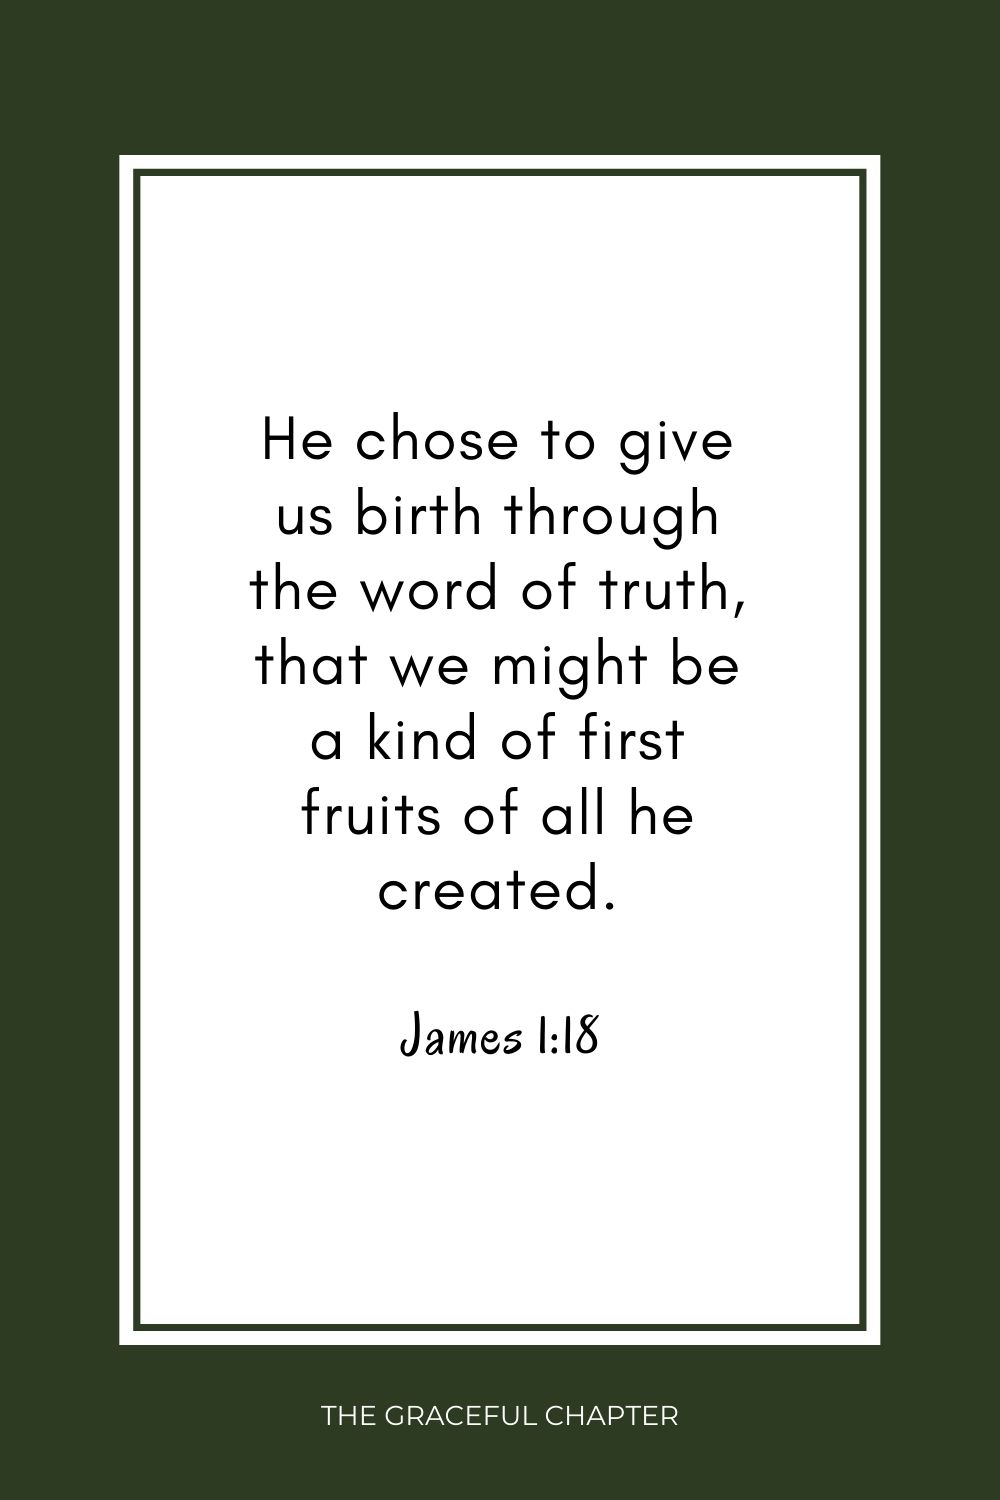 He chose to give us birth through the word of truth, that we might be a kind of first fruits of all he created. James 1:18